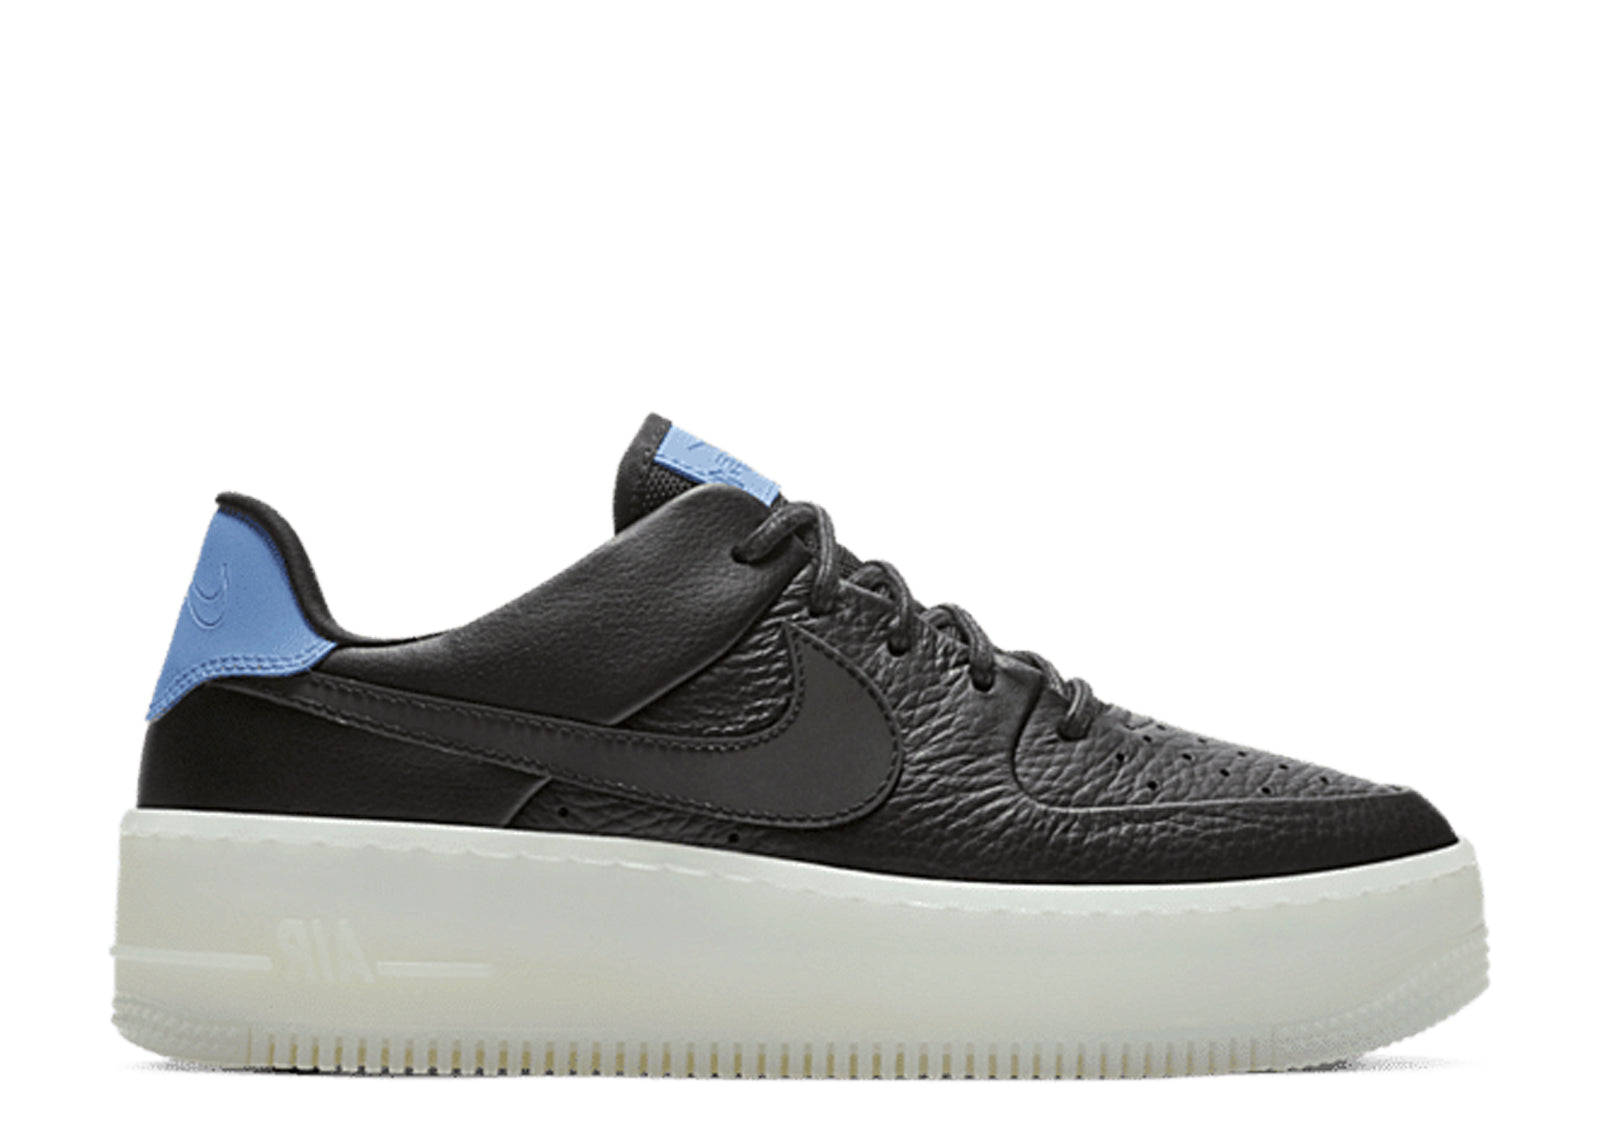 Second Chance - Nike Go to item 1 Sage Low Black/Glace - 37,5 | NEW